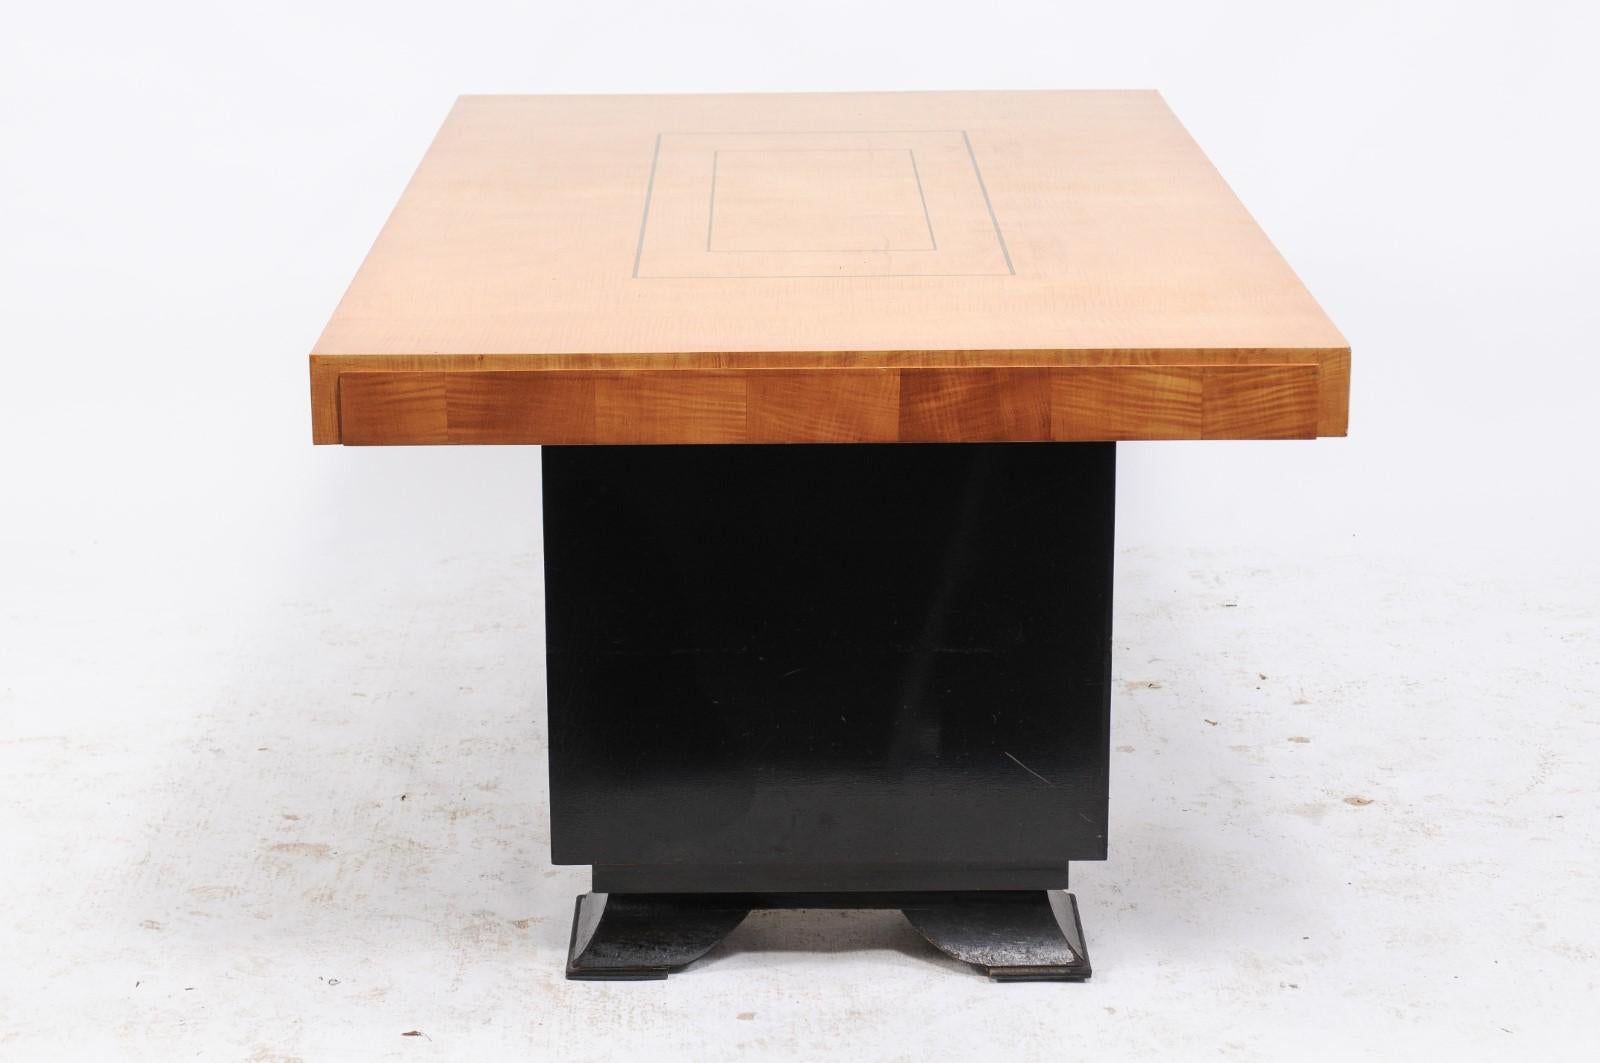 A Belgian Brutalist period table from the mid-20th century, with rectangular top, Pagoda style black base and green accents, in the style of the De Coene Freres. This unique, one-of-a-kind handmade table is an original design from Belgium of